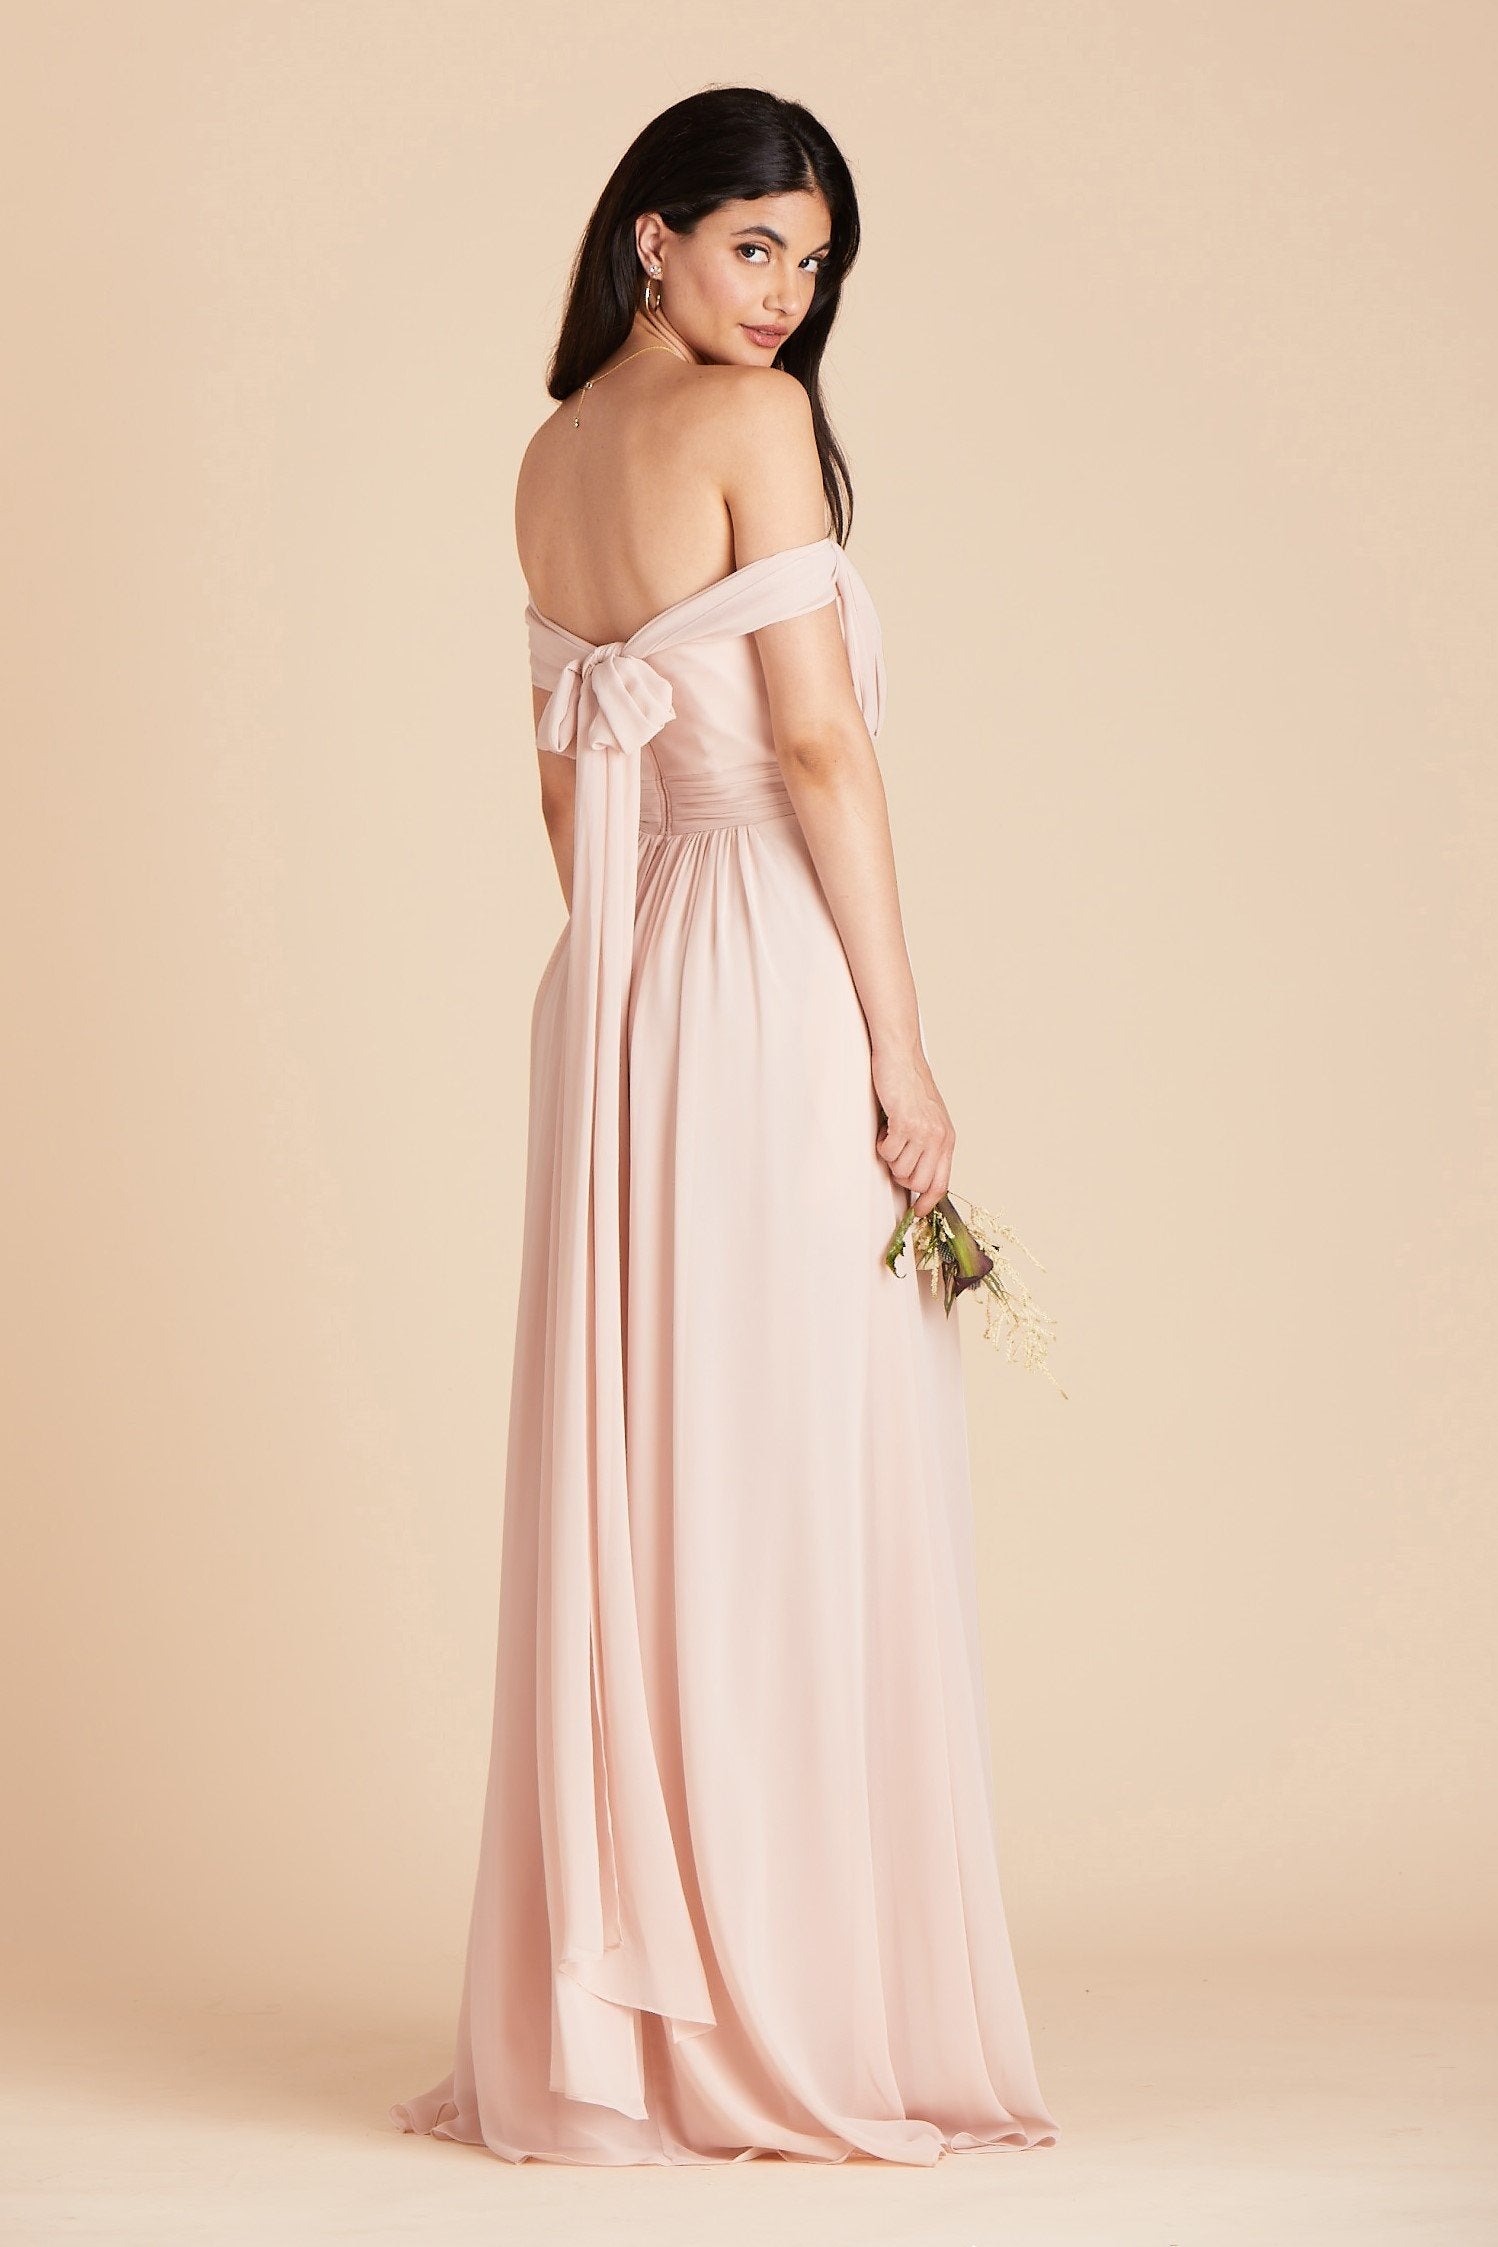 Grace convertible bridesmaid dress in pale blush pink chiffon by Birdy Grey, side view